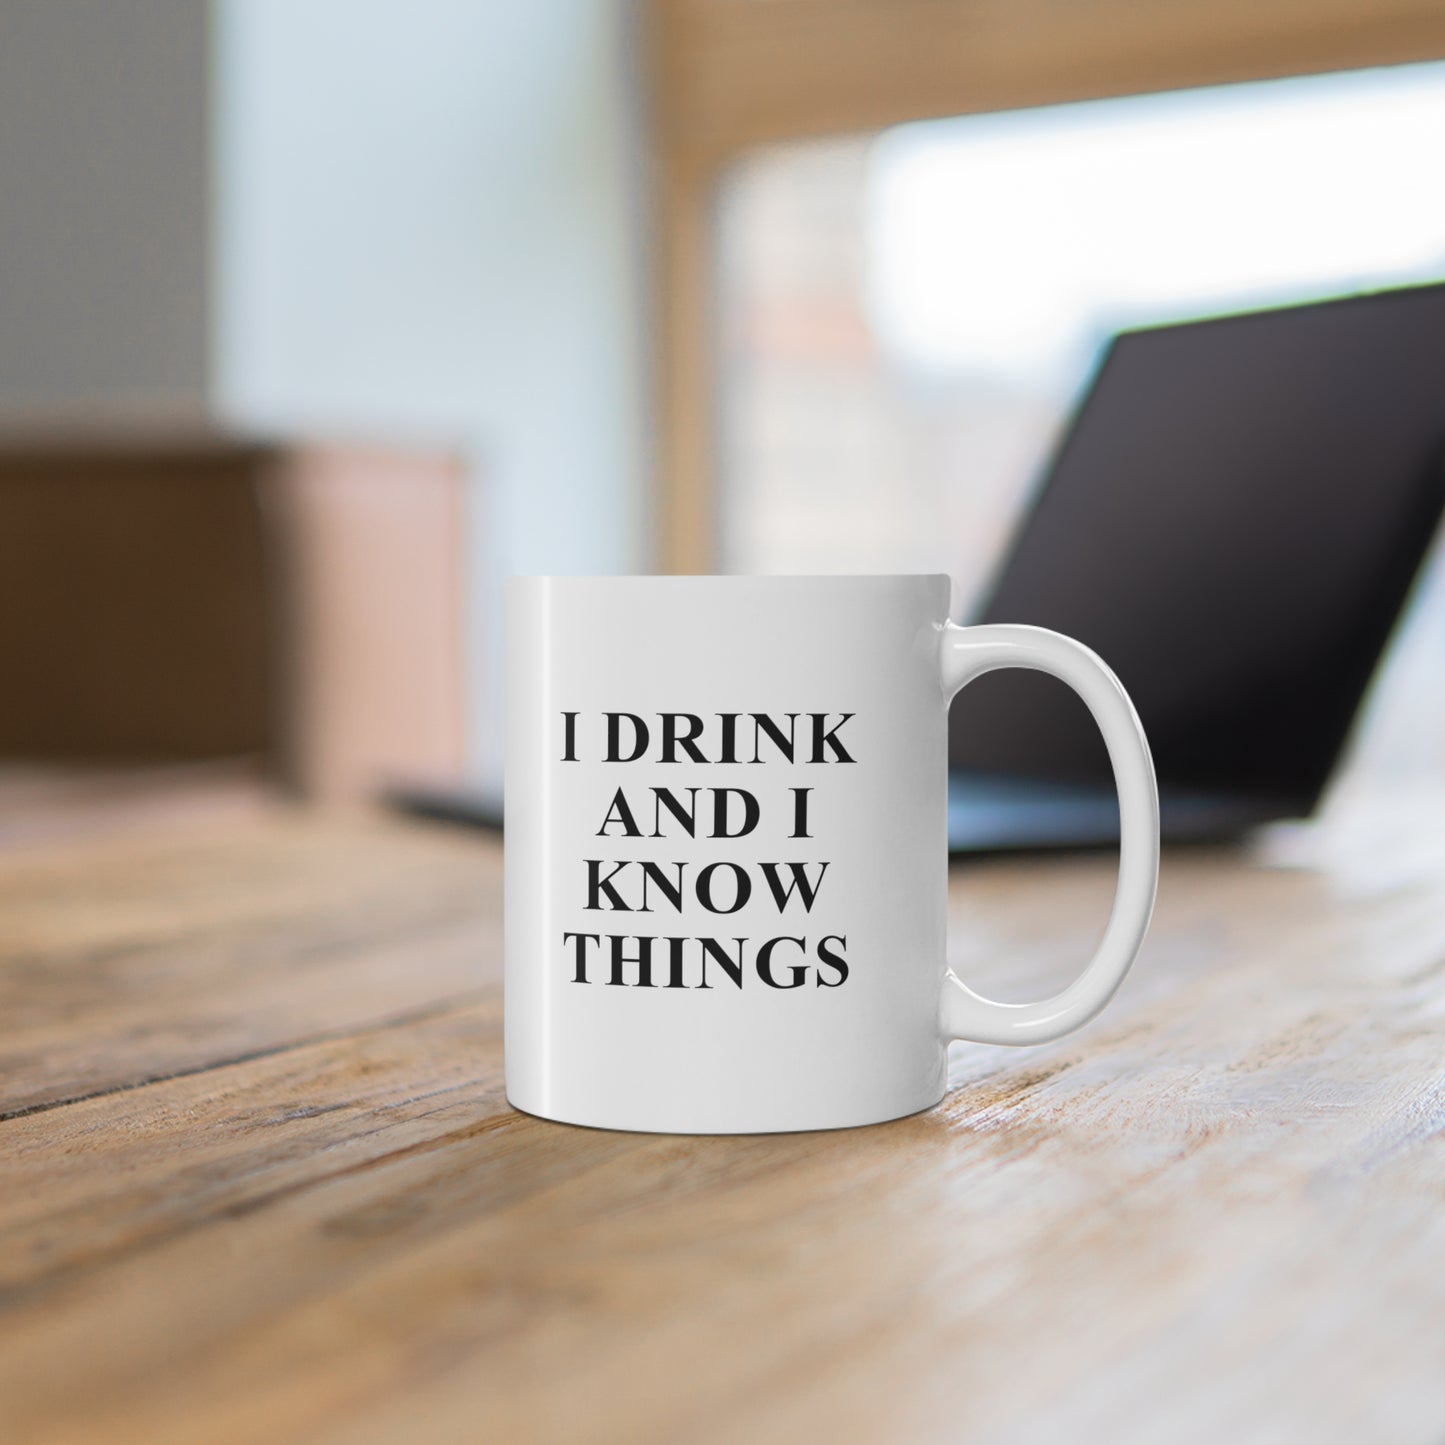 11oz ceramic mug with quote I Drink And I Know Things